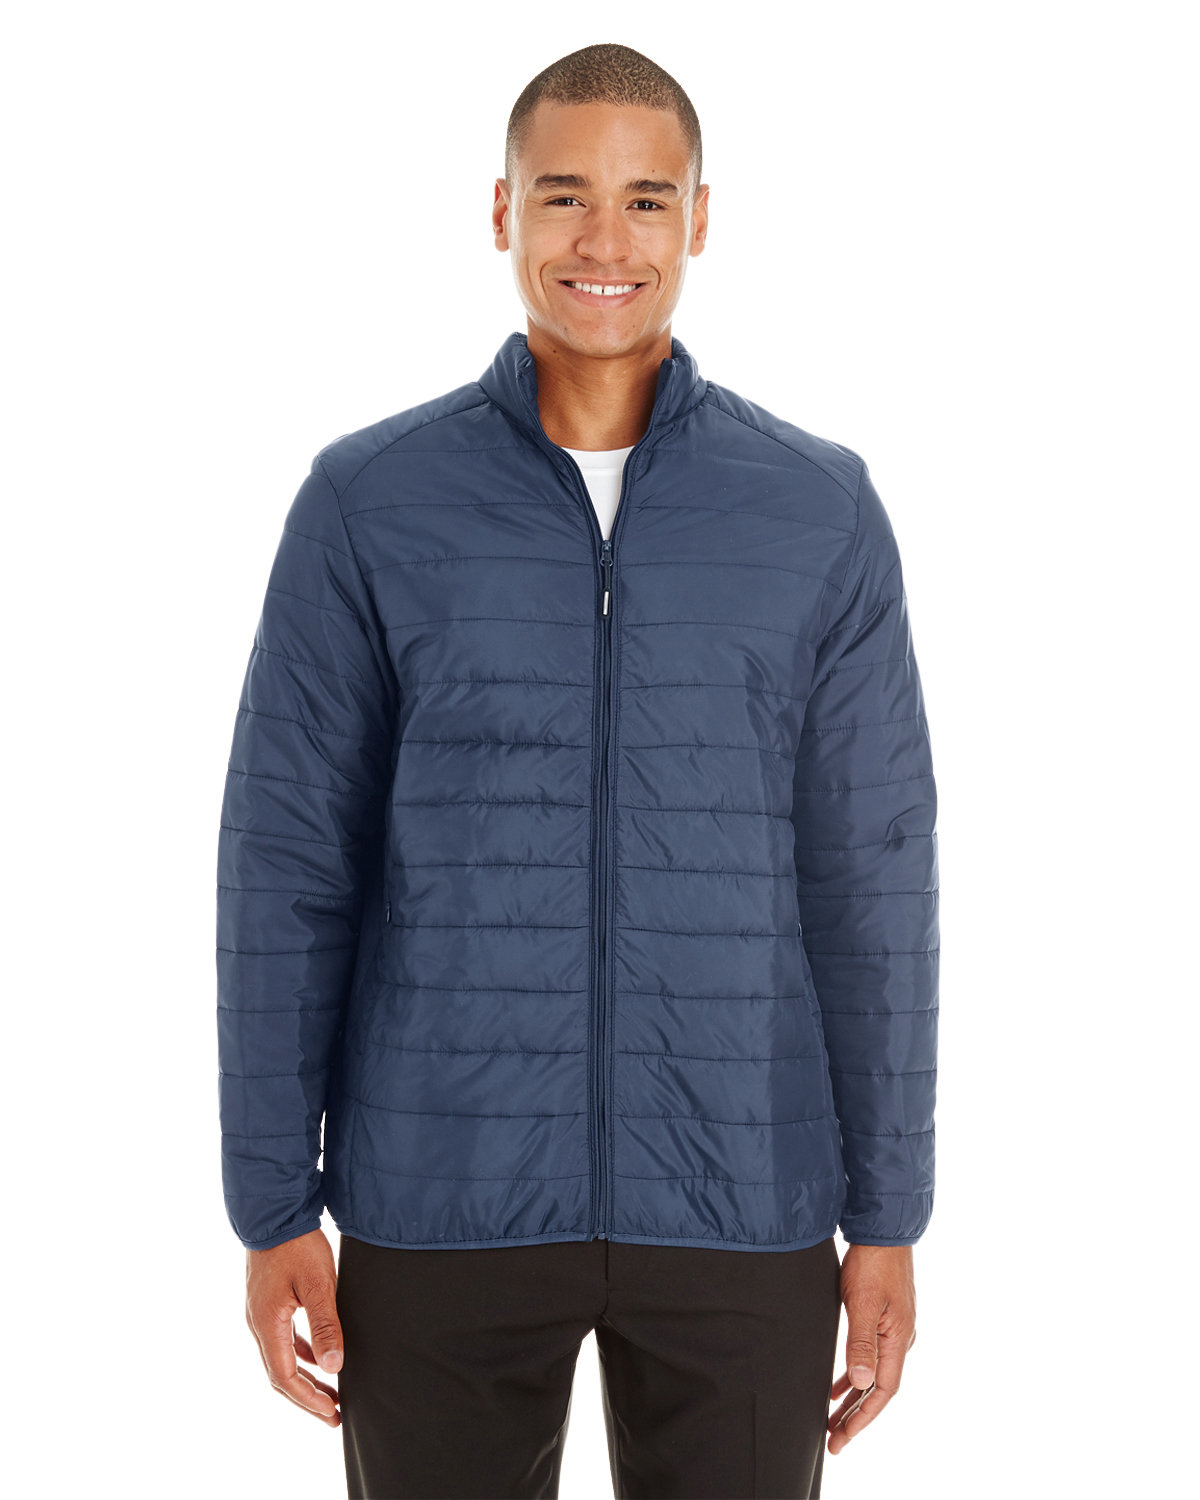 Core 365 Men's Prevail Packable Puffer Jacket CLASSIC NAVY 